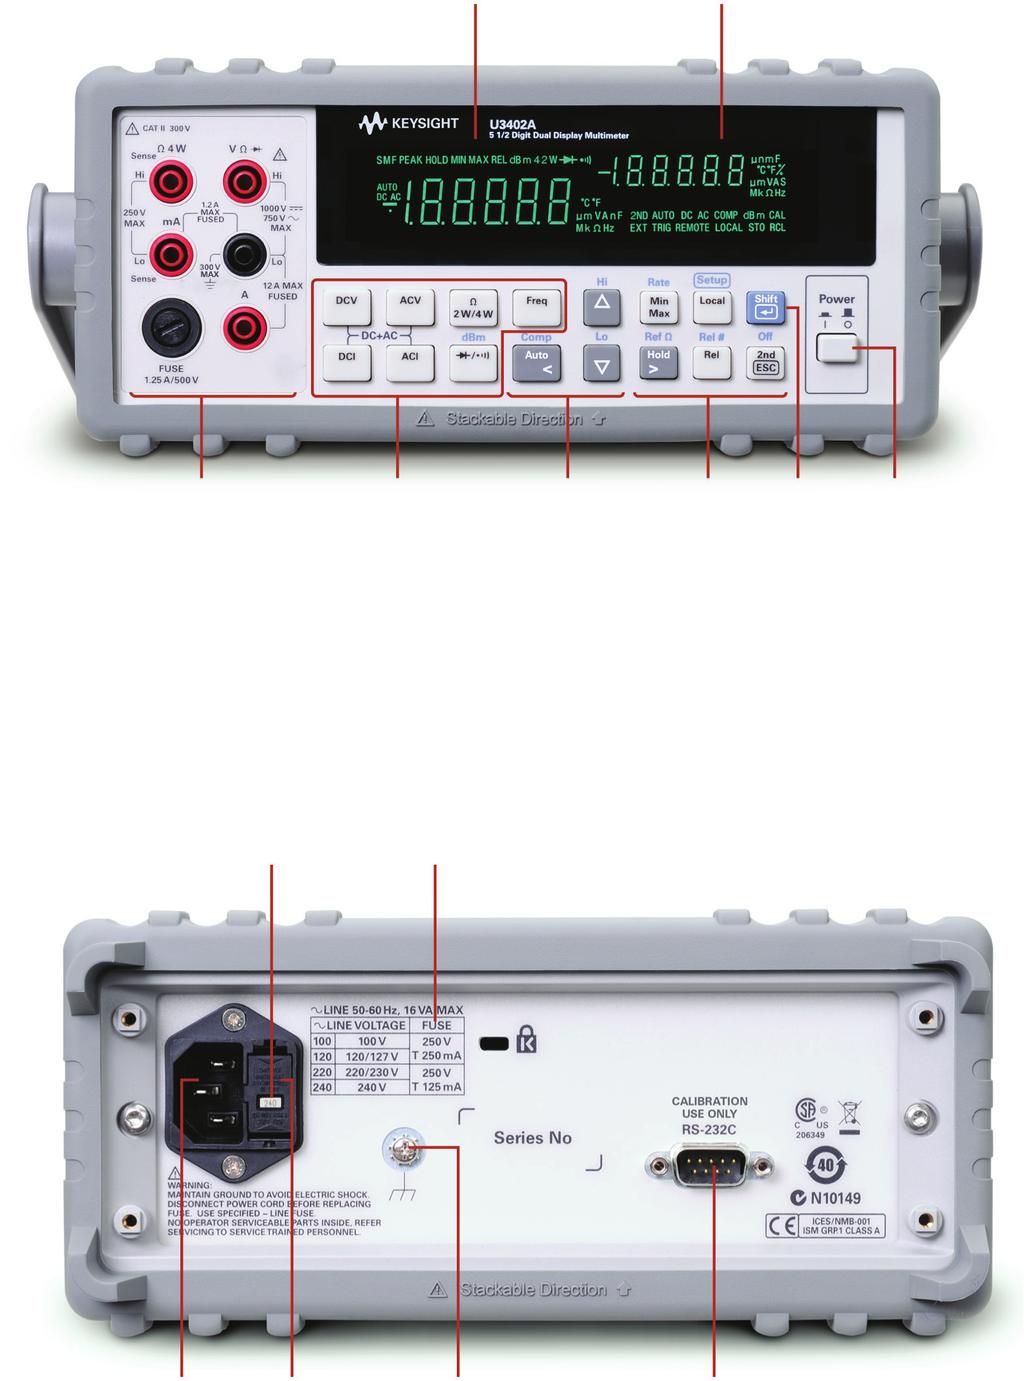 03 Keysight U3400 Series 4½ and 5½ Digit Digital Multimeters - Data Sheet Take a Closer Look Primary display Secondary display Input terminals and current fuse Measurement function keypads